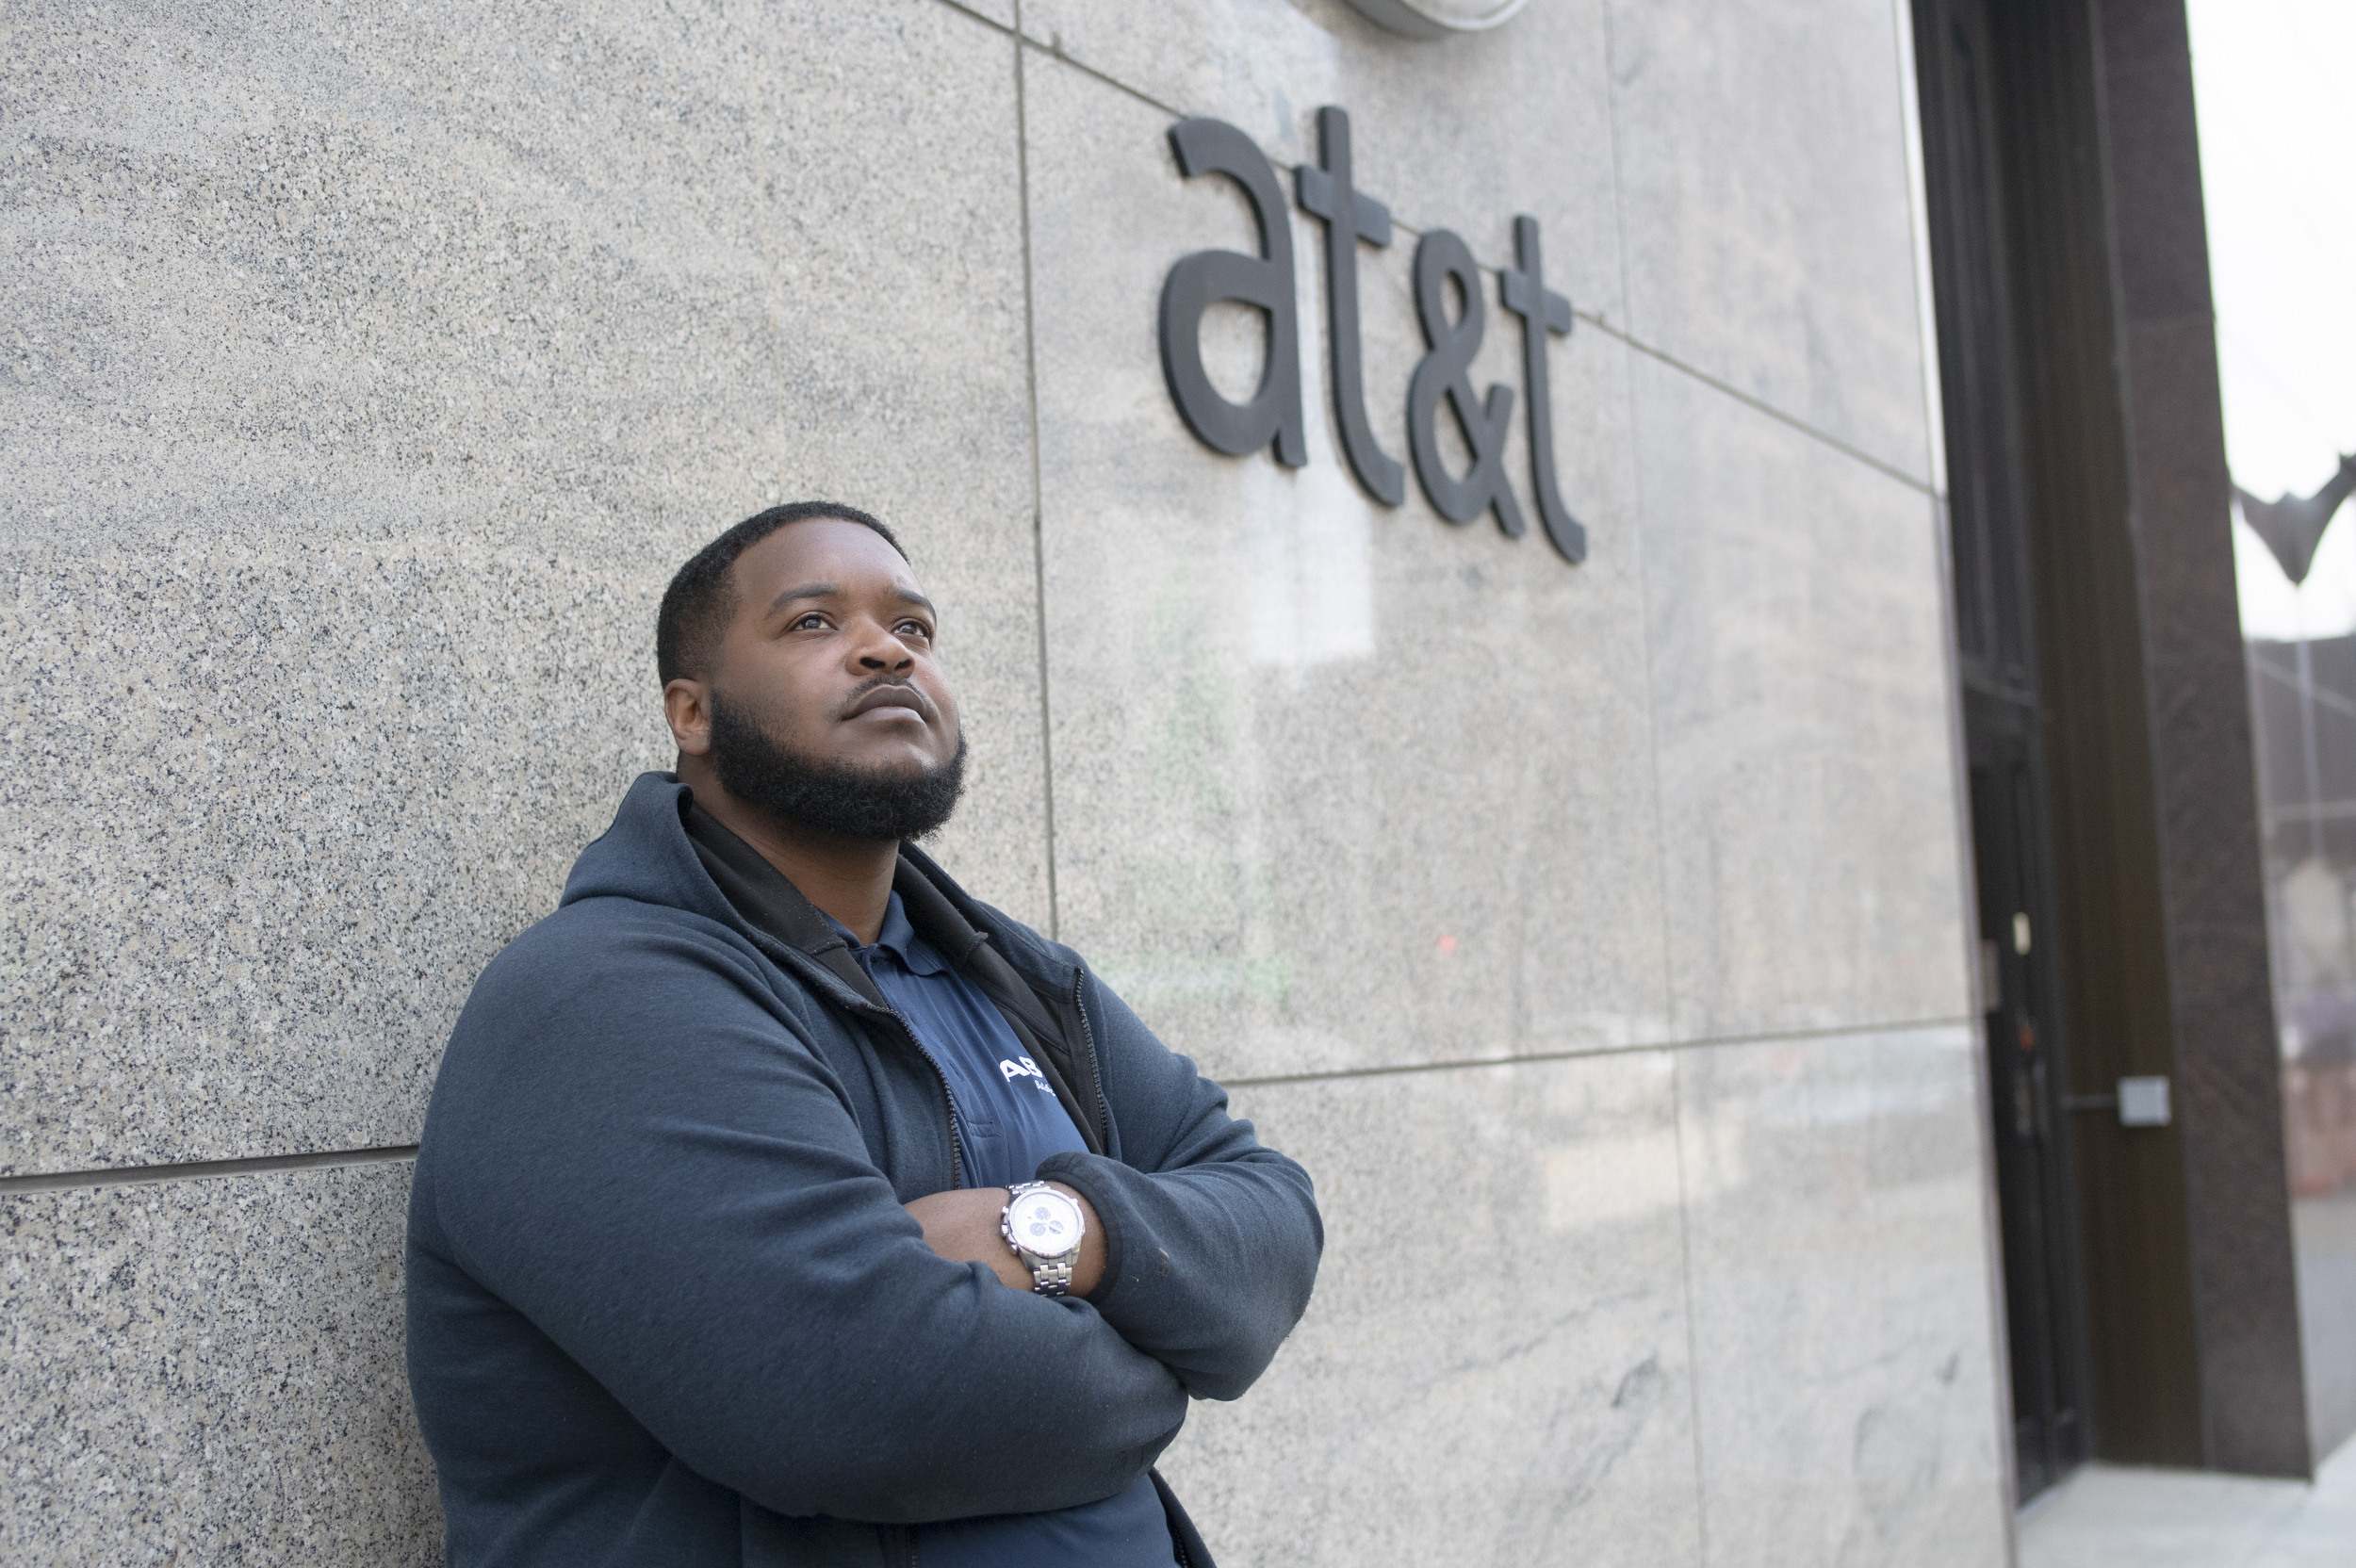 James Rudd is seen outside of his workplace at the AT&T building in downtown Milwaukee